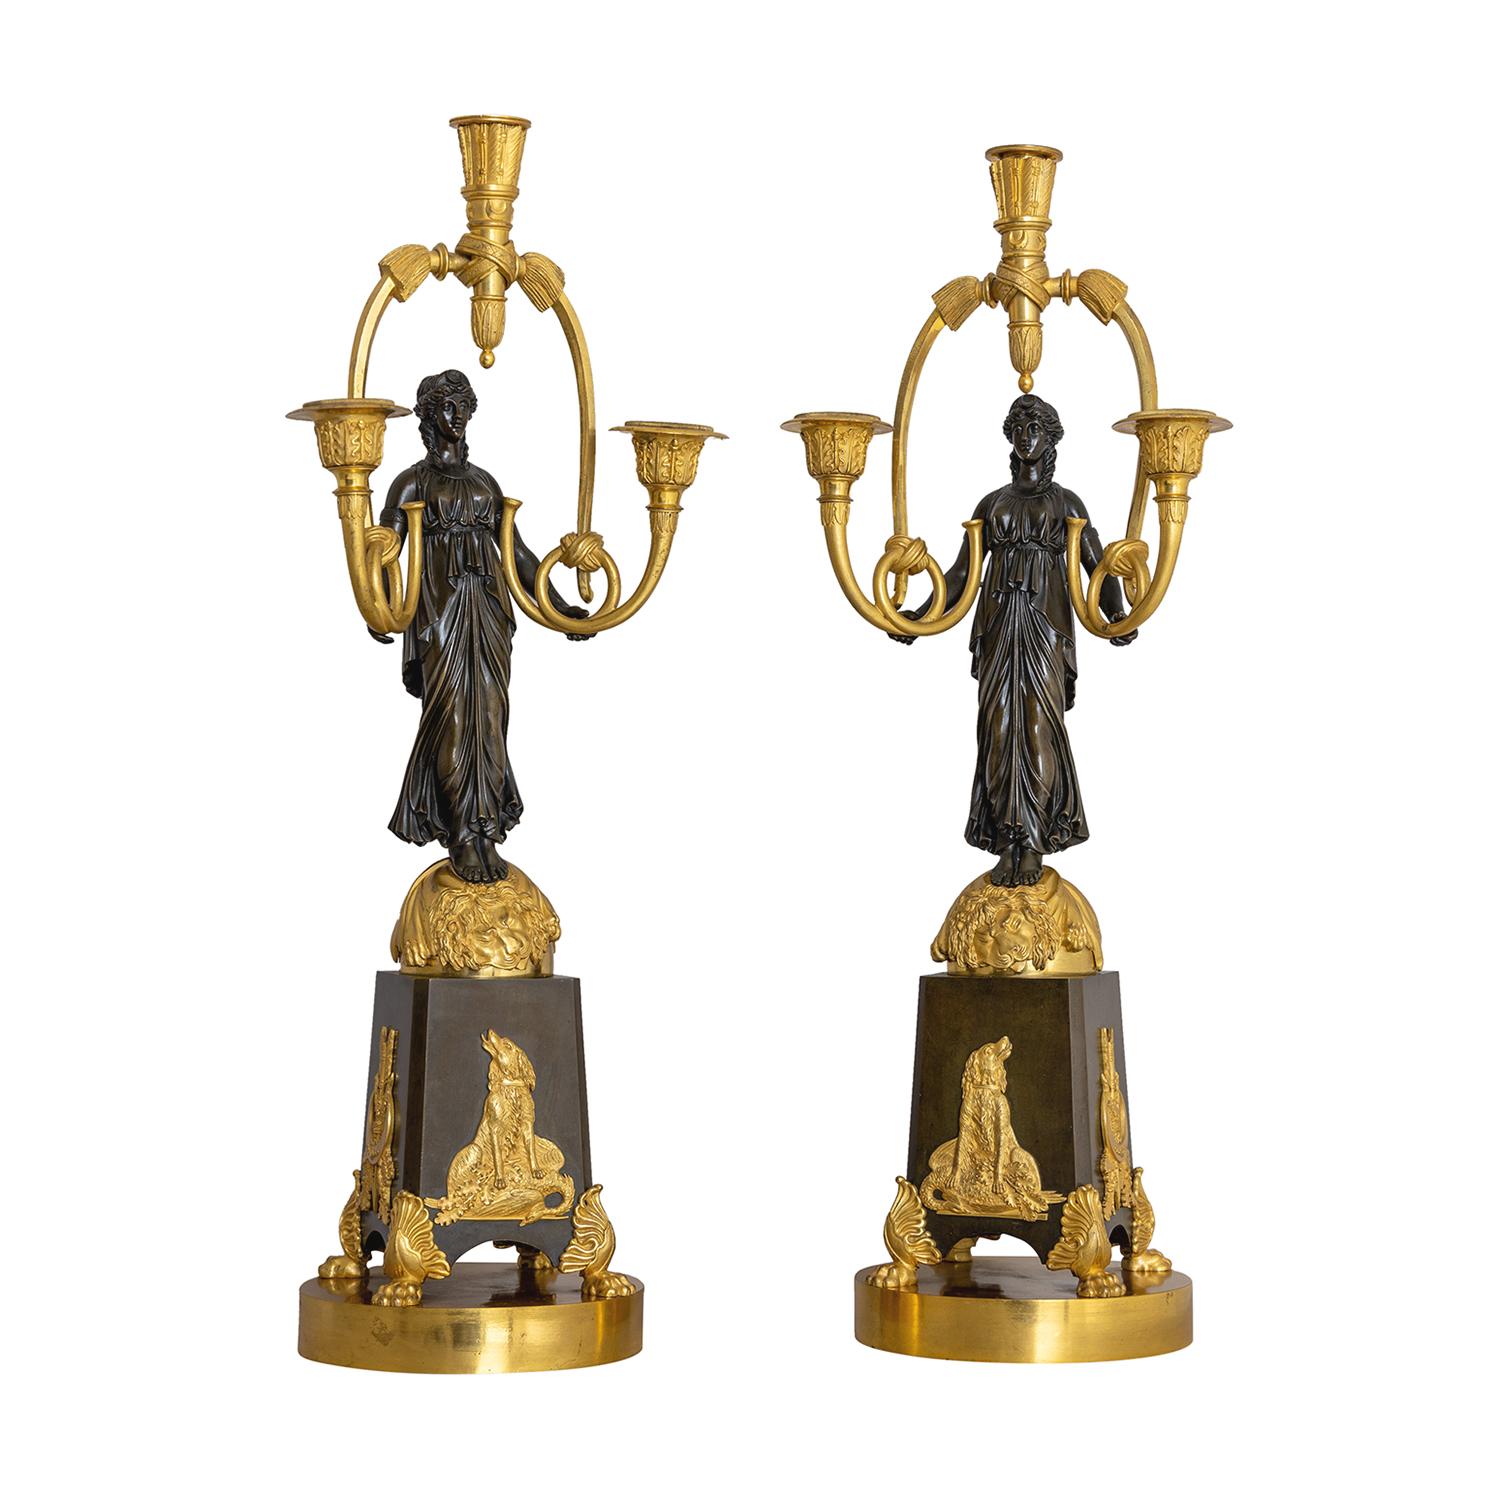 A gold-black, antique French pair of girandoles made of handcrafted gilded bronze attributed to Friedrich Bergenfeldt, in good condition. Each of the detailed Parisian candle holders are composed with a female warrior, particularized with hunting